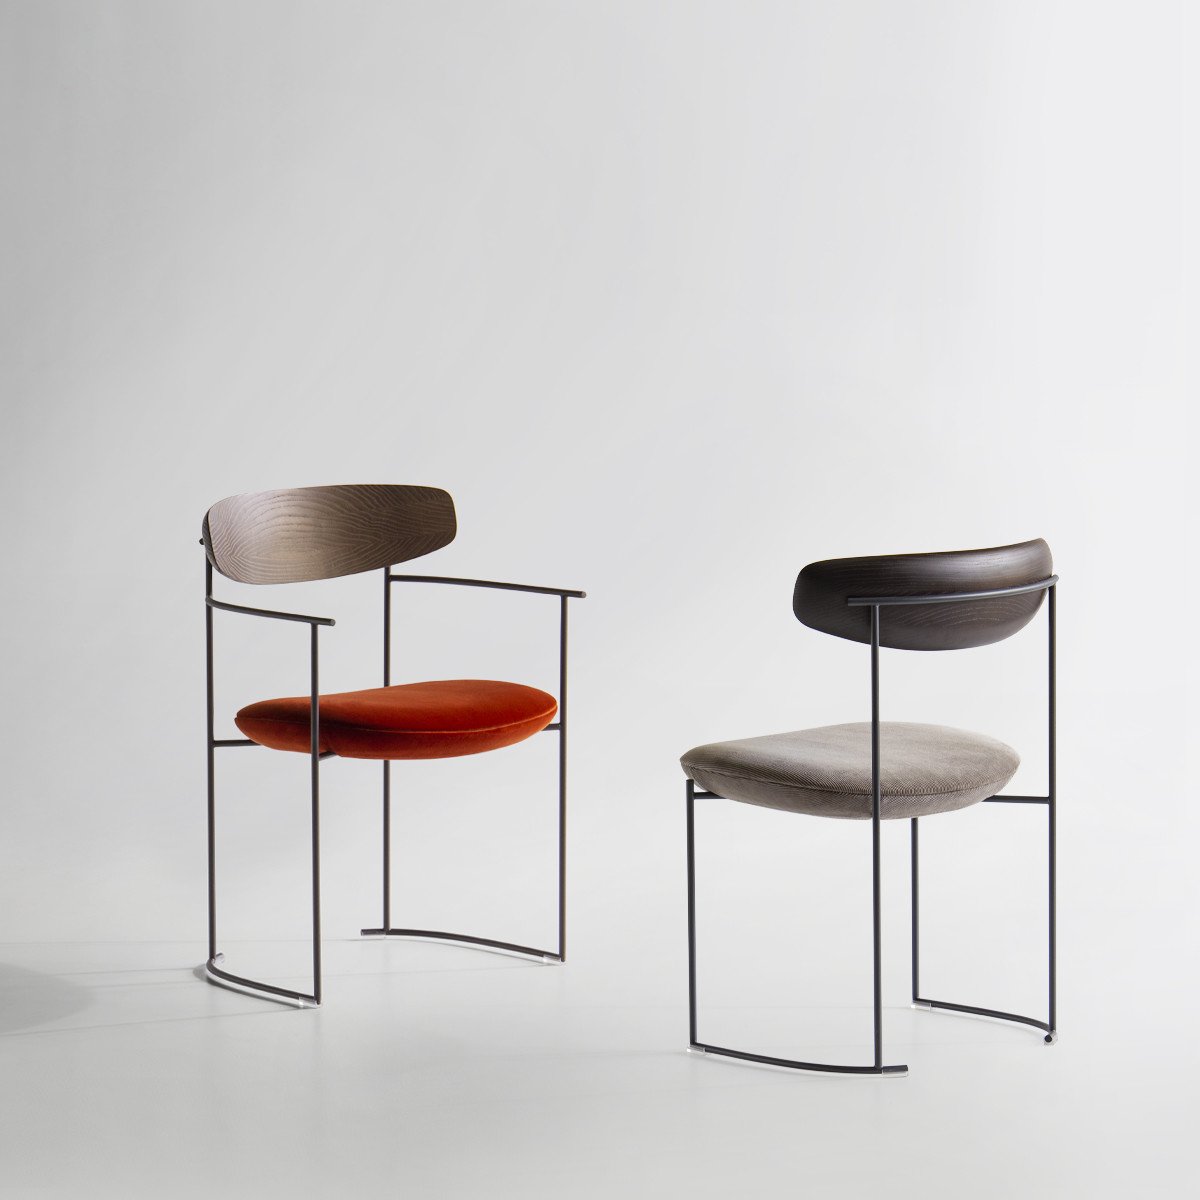 Keel Chair from Potocco, designed by M + V